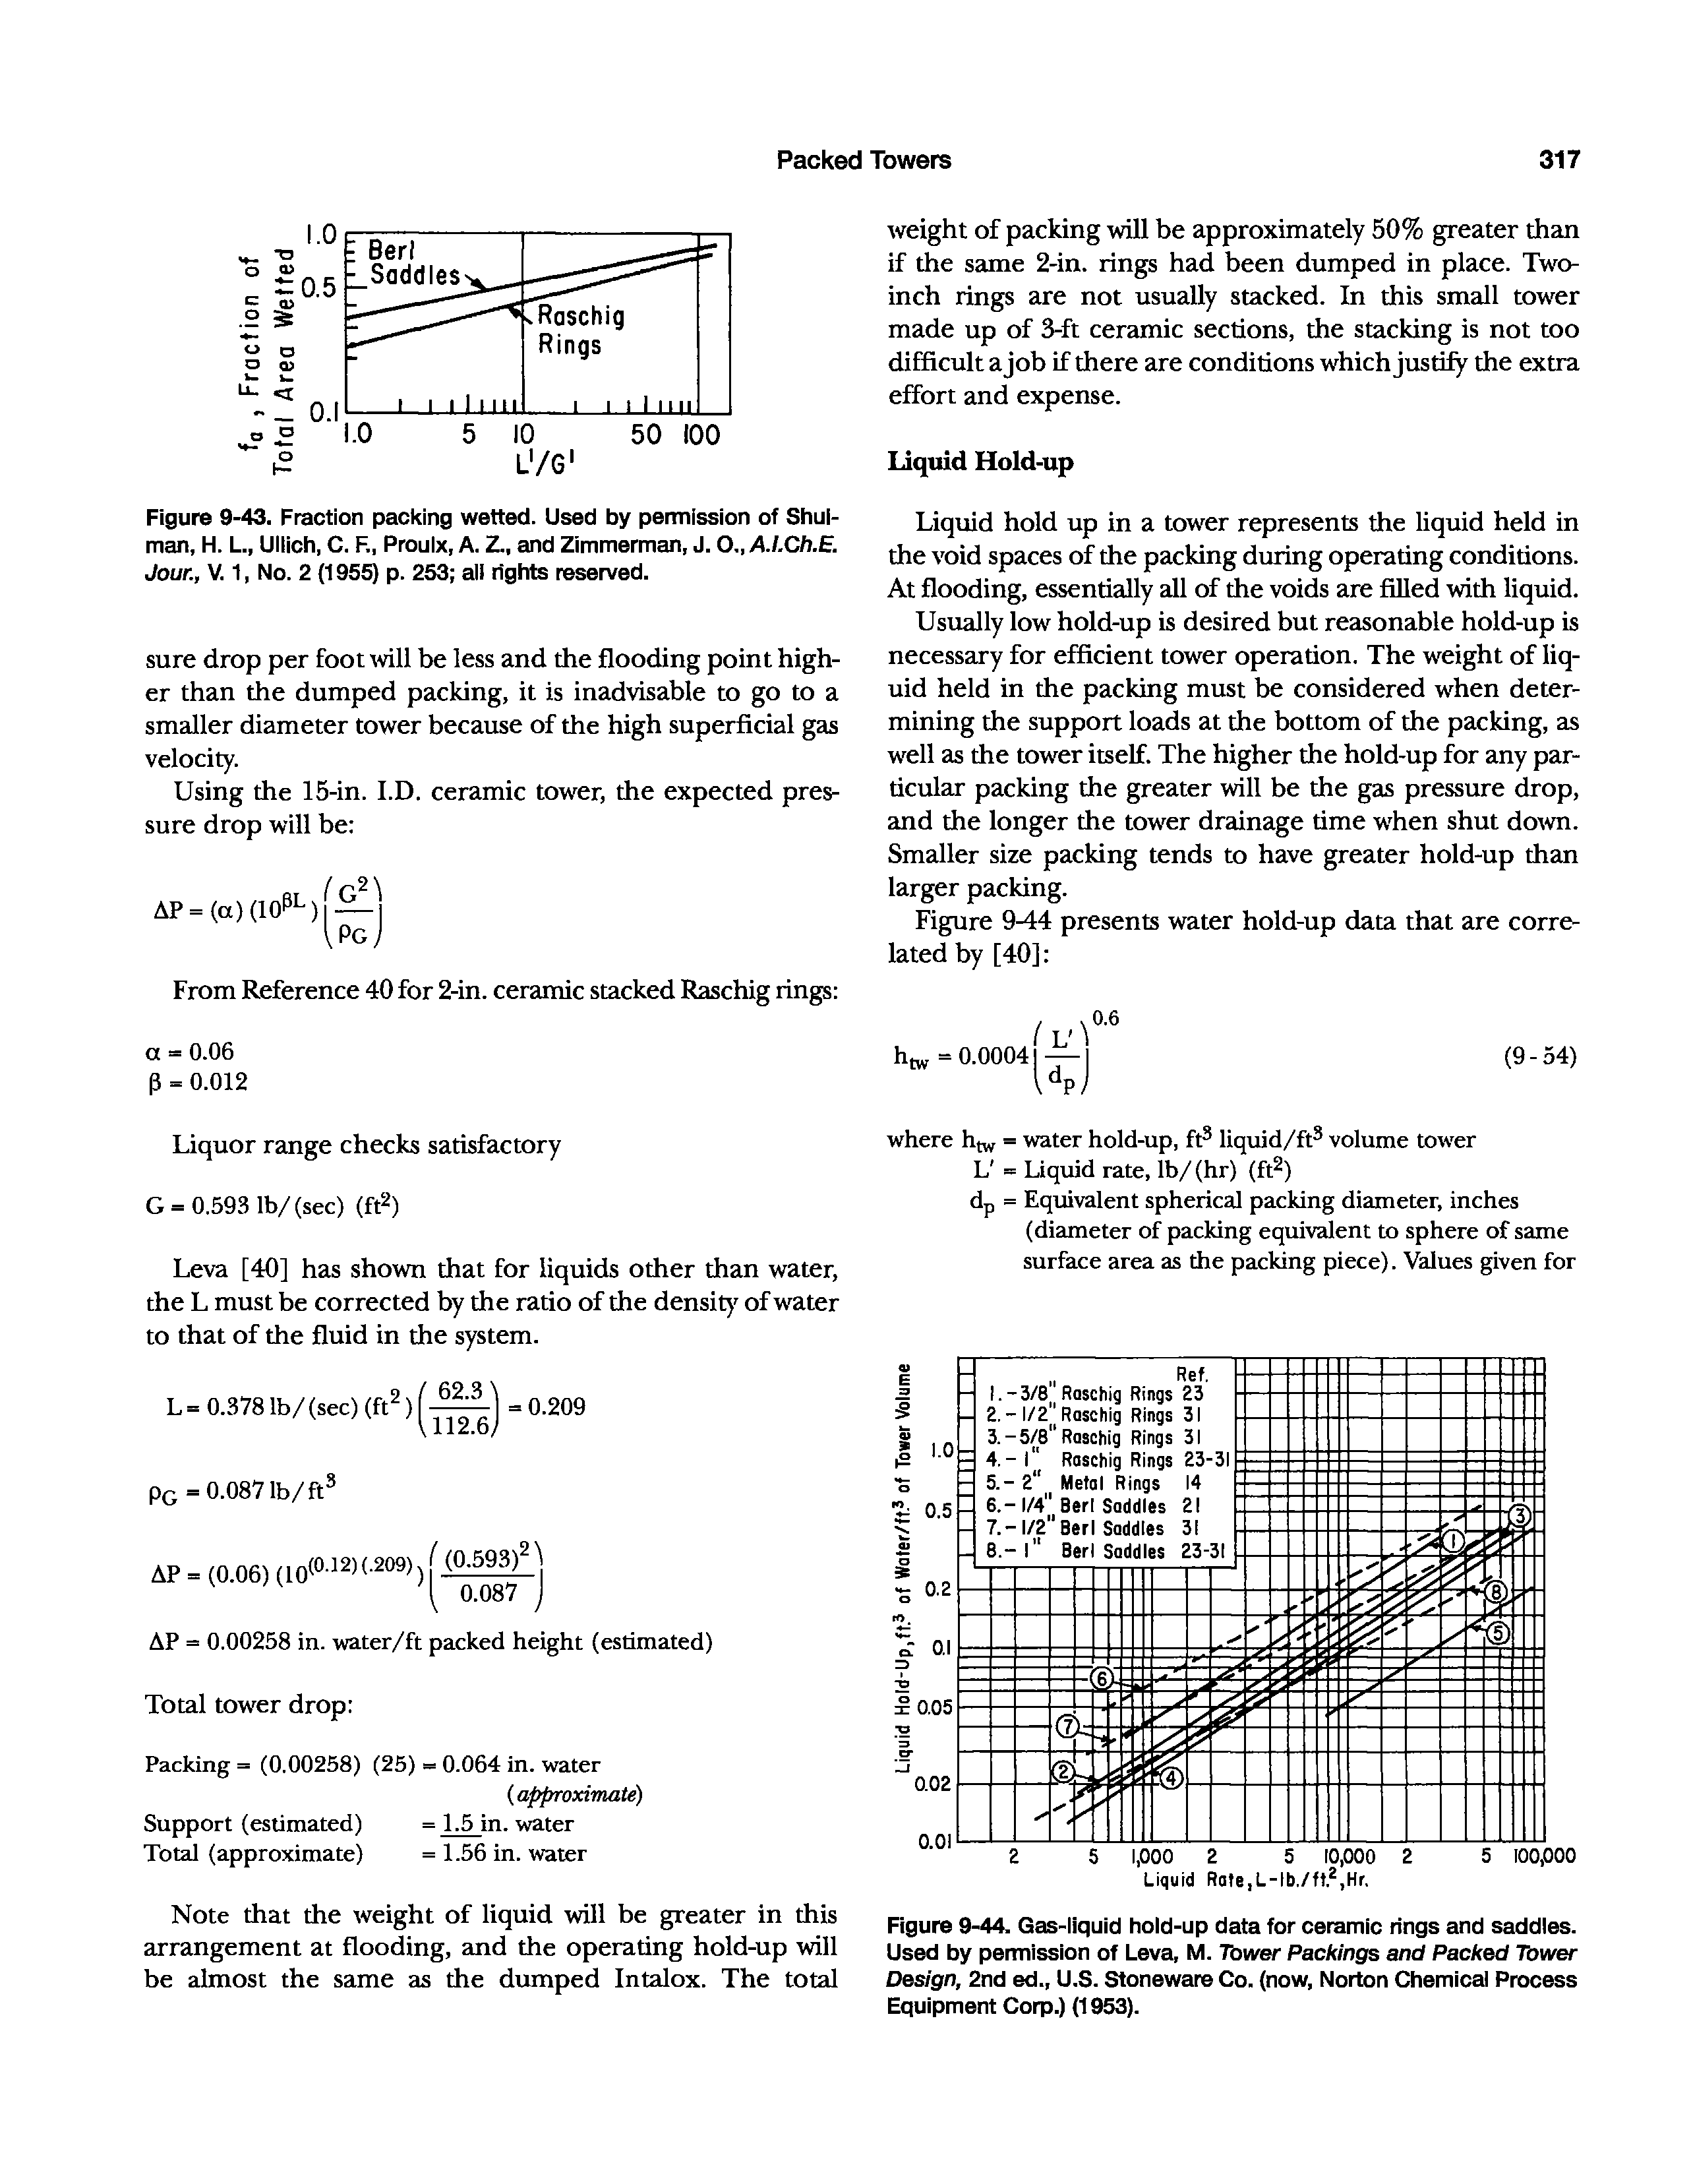 Figure 9-44. Gas-liquid hold-up data for ceramic rings and saddles. Used by permission of Leva, M. Tbwer Packings and Packed Tower Design, 2nd ed., U.S. Stoneware Co. (now, Norton Chemical Process Equipment Corp.) (1953).